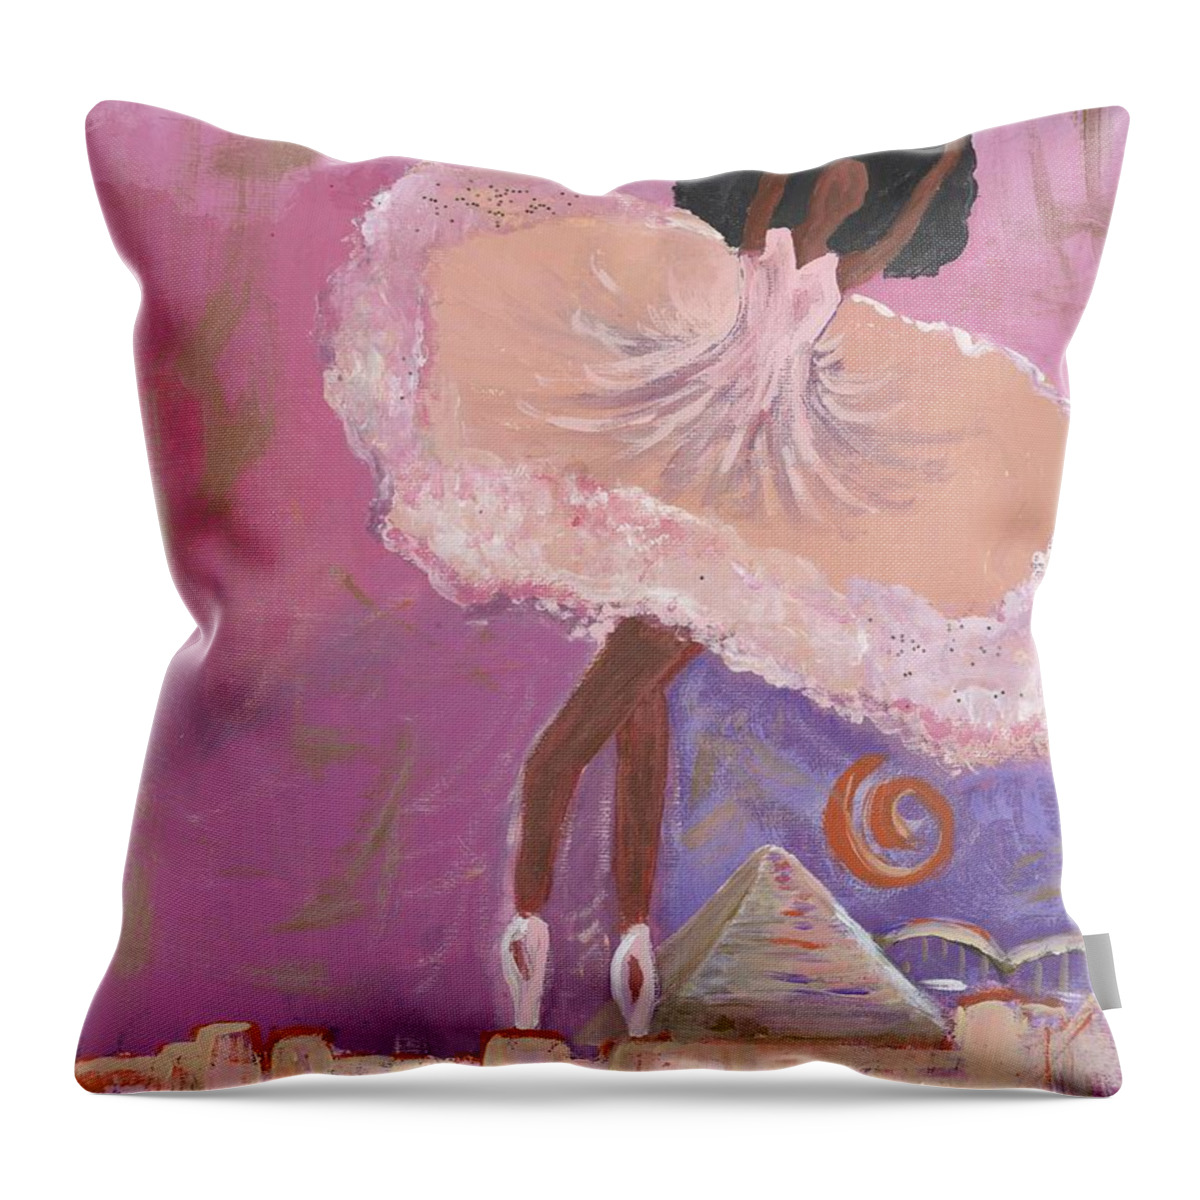  Throw Pillow featuring the painting Dancing Pyramids by Francis Brown